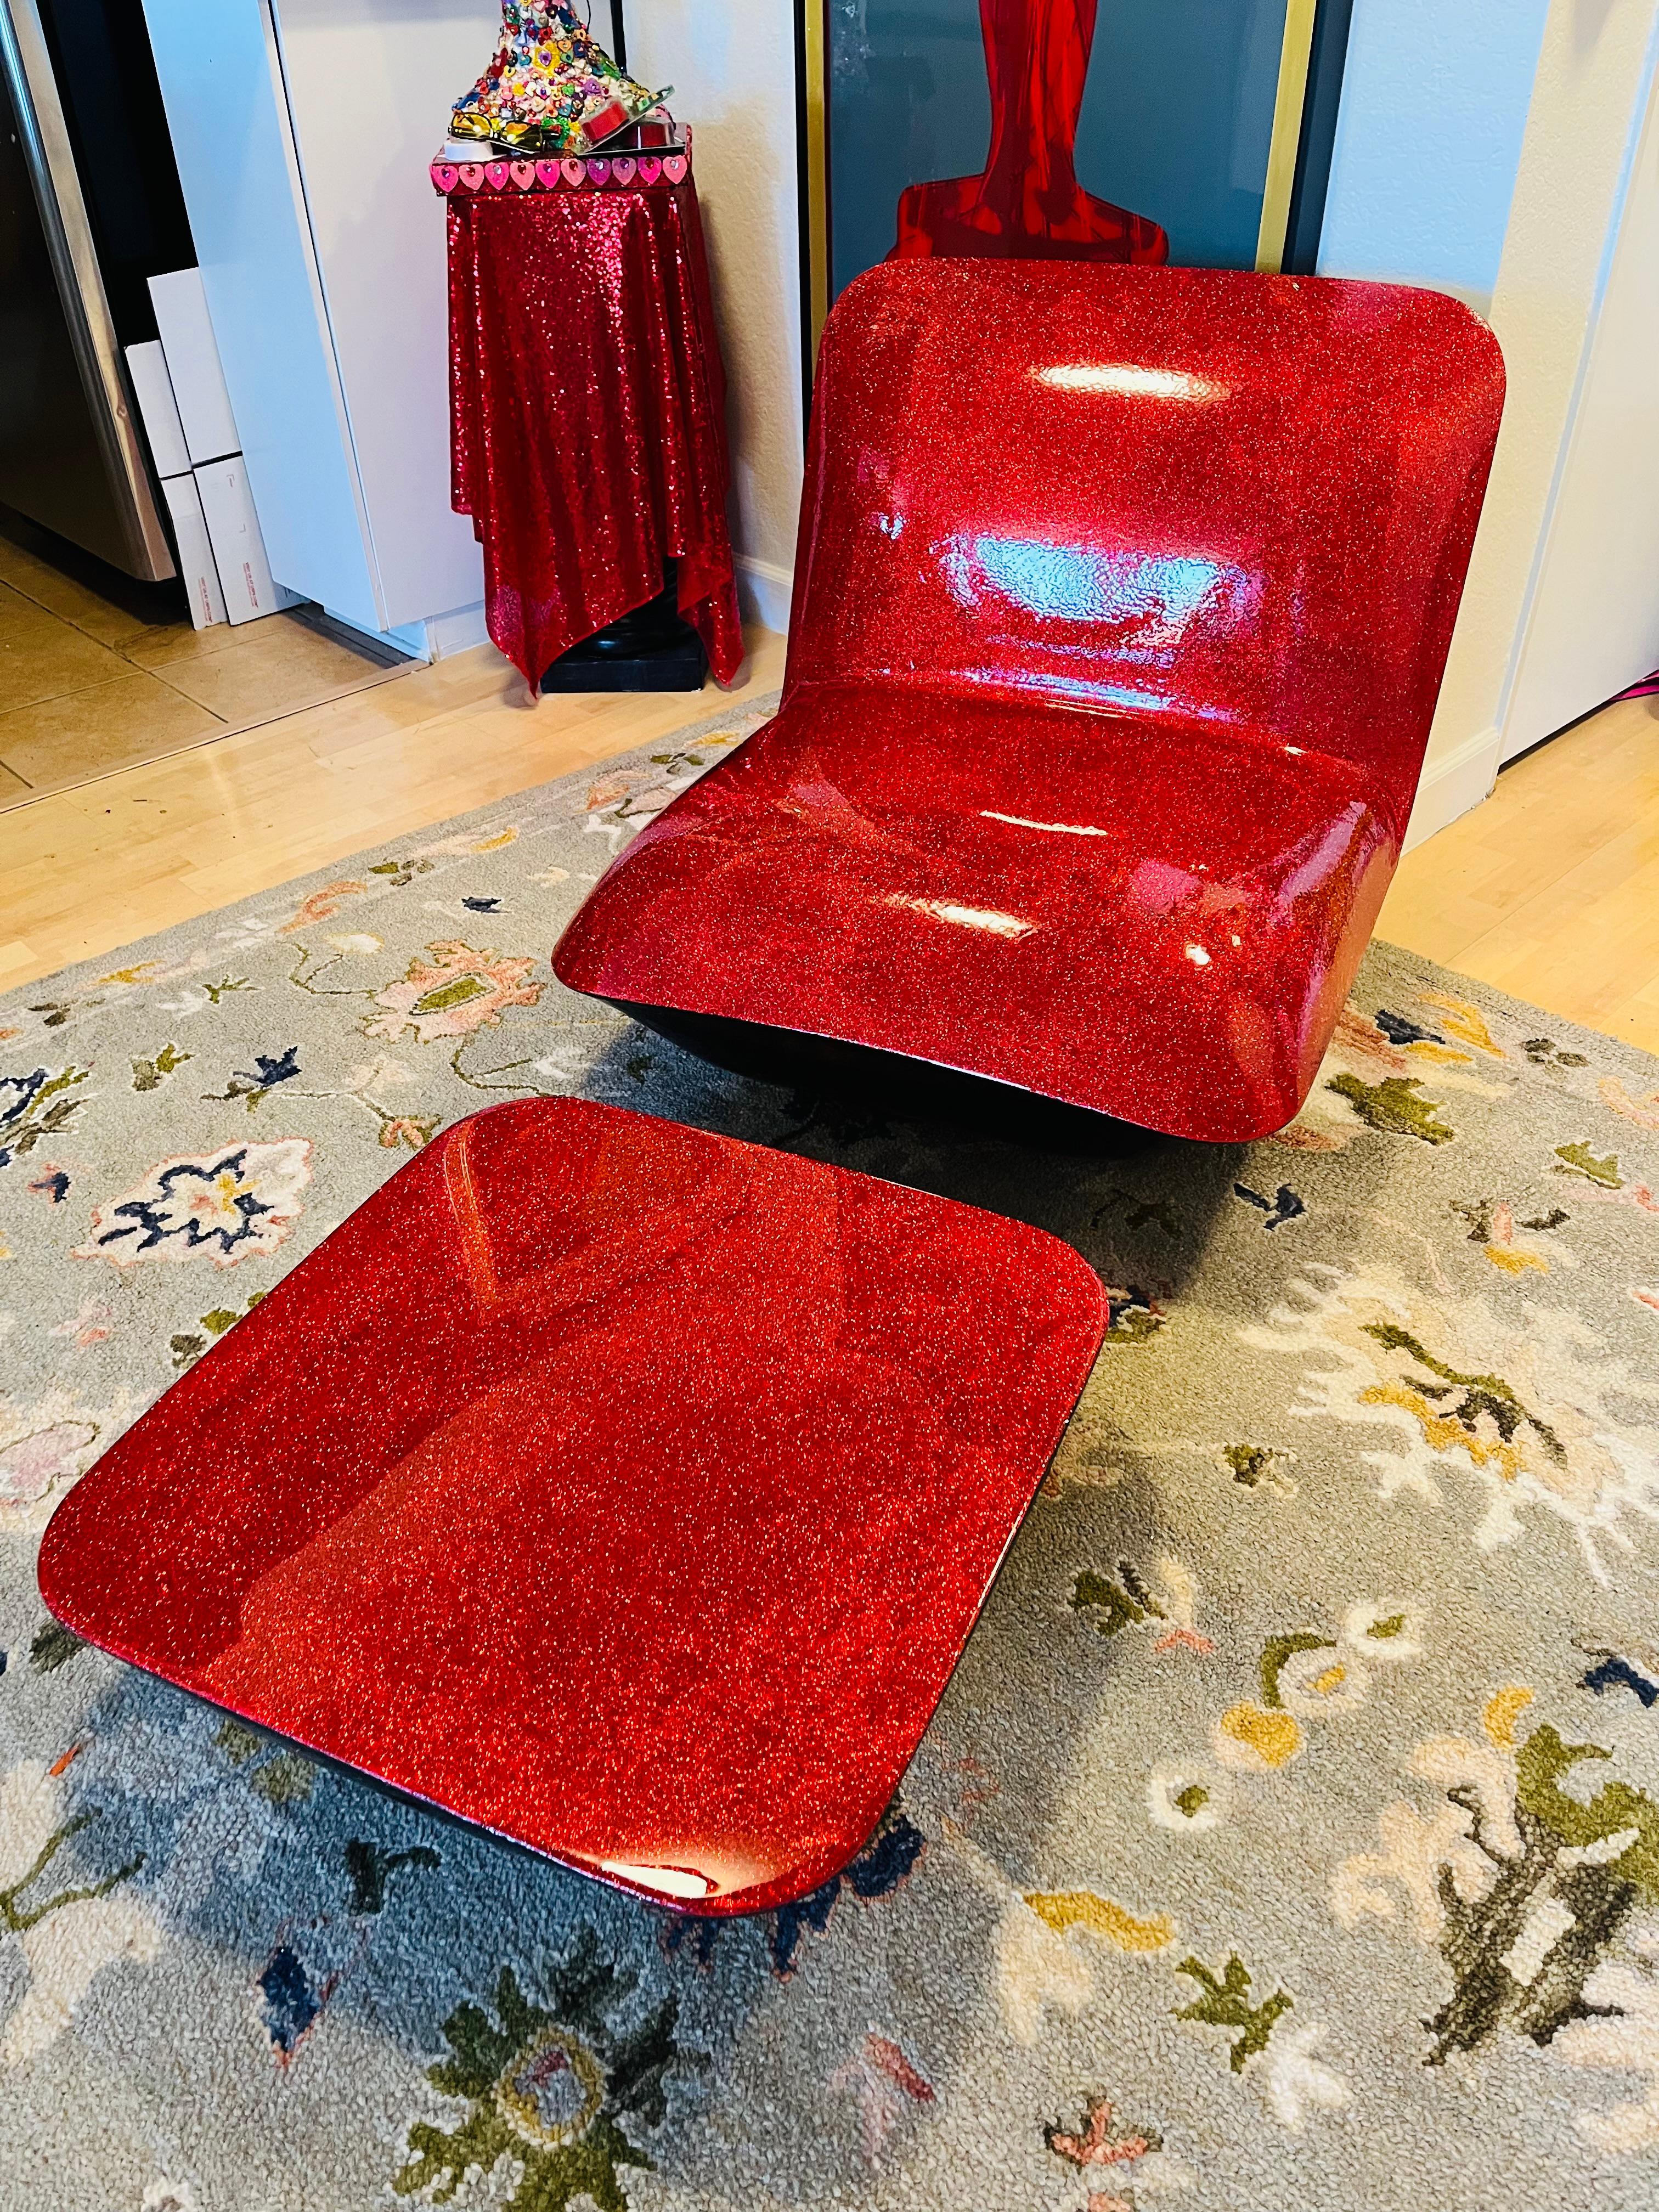 PRIDE GLITTER CHAIR WITH OTTOMAN I (One Of a Kind Functional Art) 12